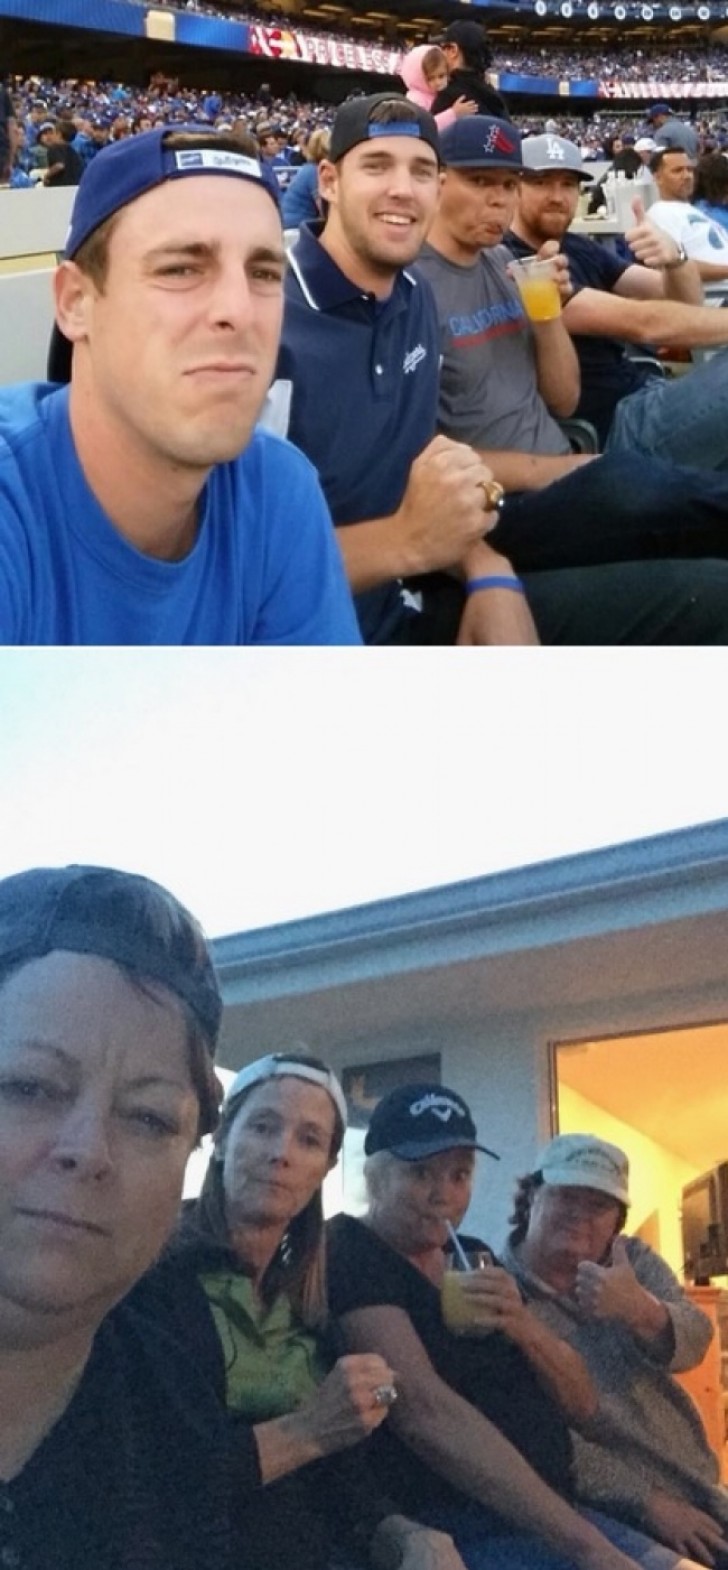 The mothers have recreated the selfie of their adult sons.